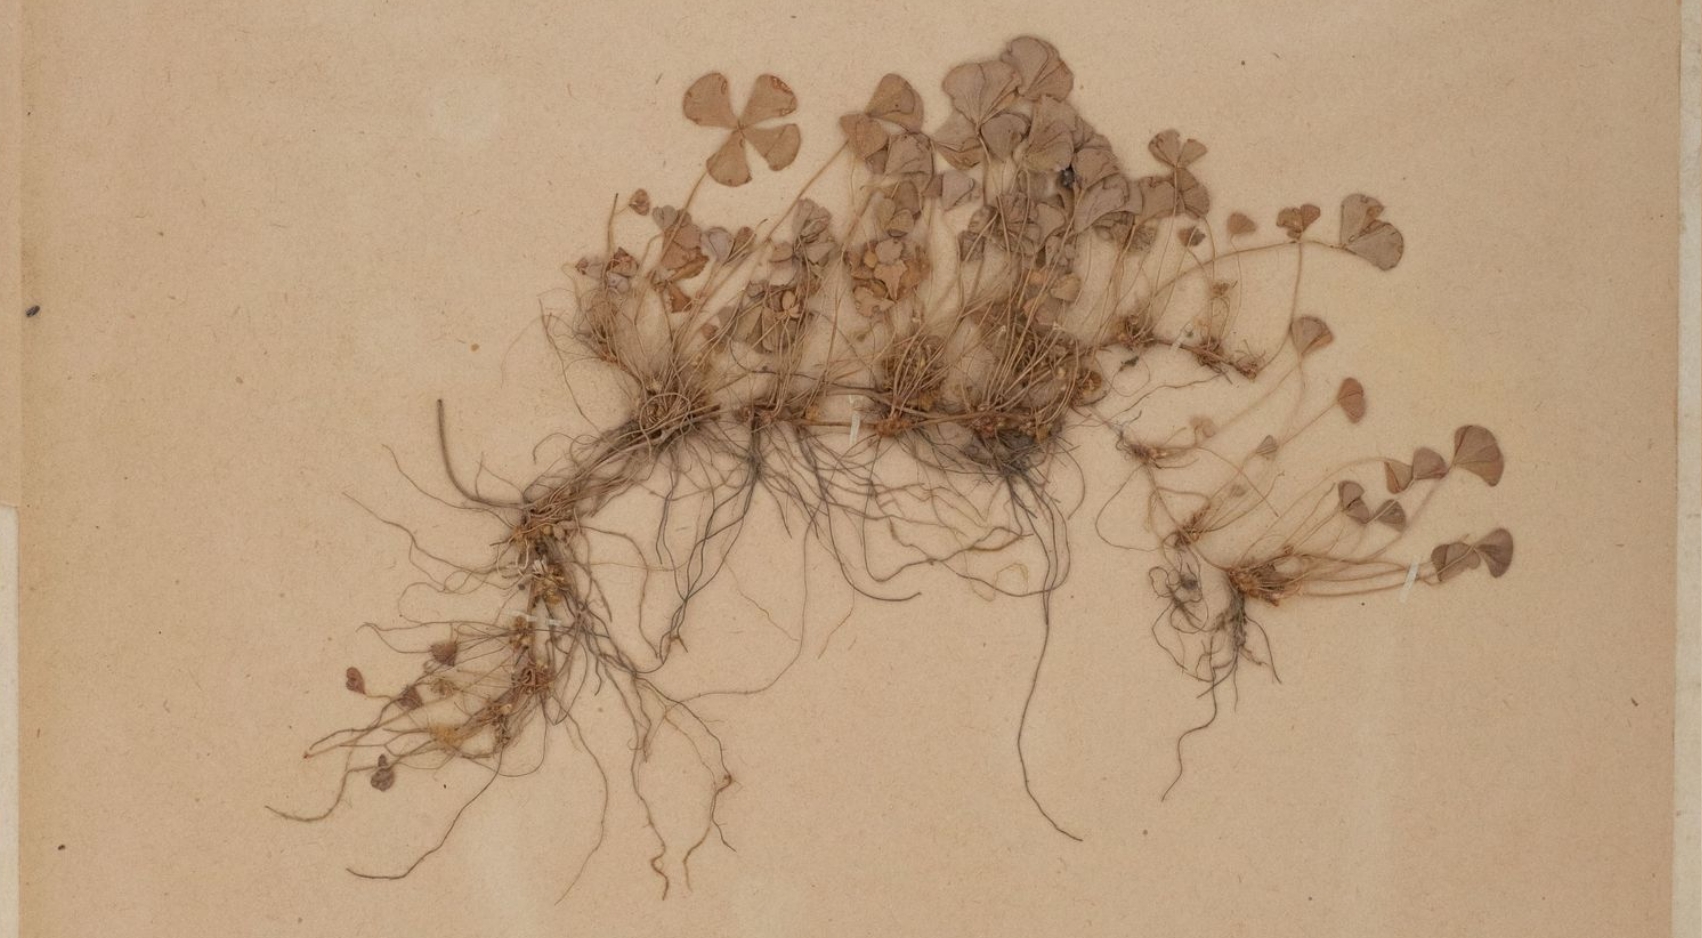 Imaged plant specimen (SDSU01636) of Marsilea vestita at the SDSU Herbarium, collected by Miss Kimball (#224) on June 7, 1897, Stonewall Mine, Cuyamaca Mountains, San Diego County, California.